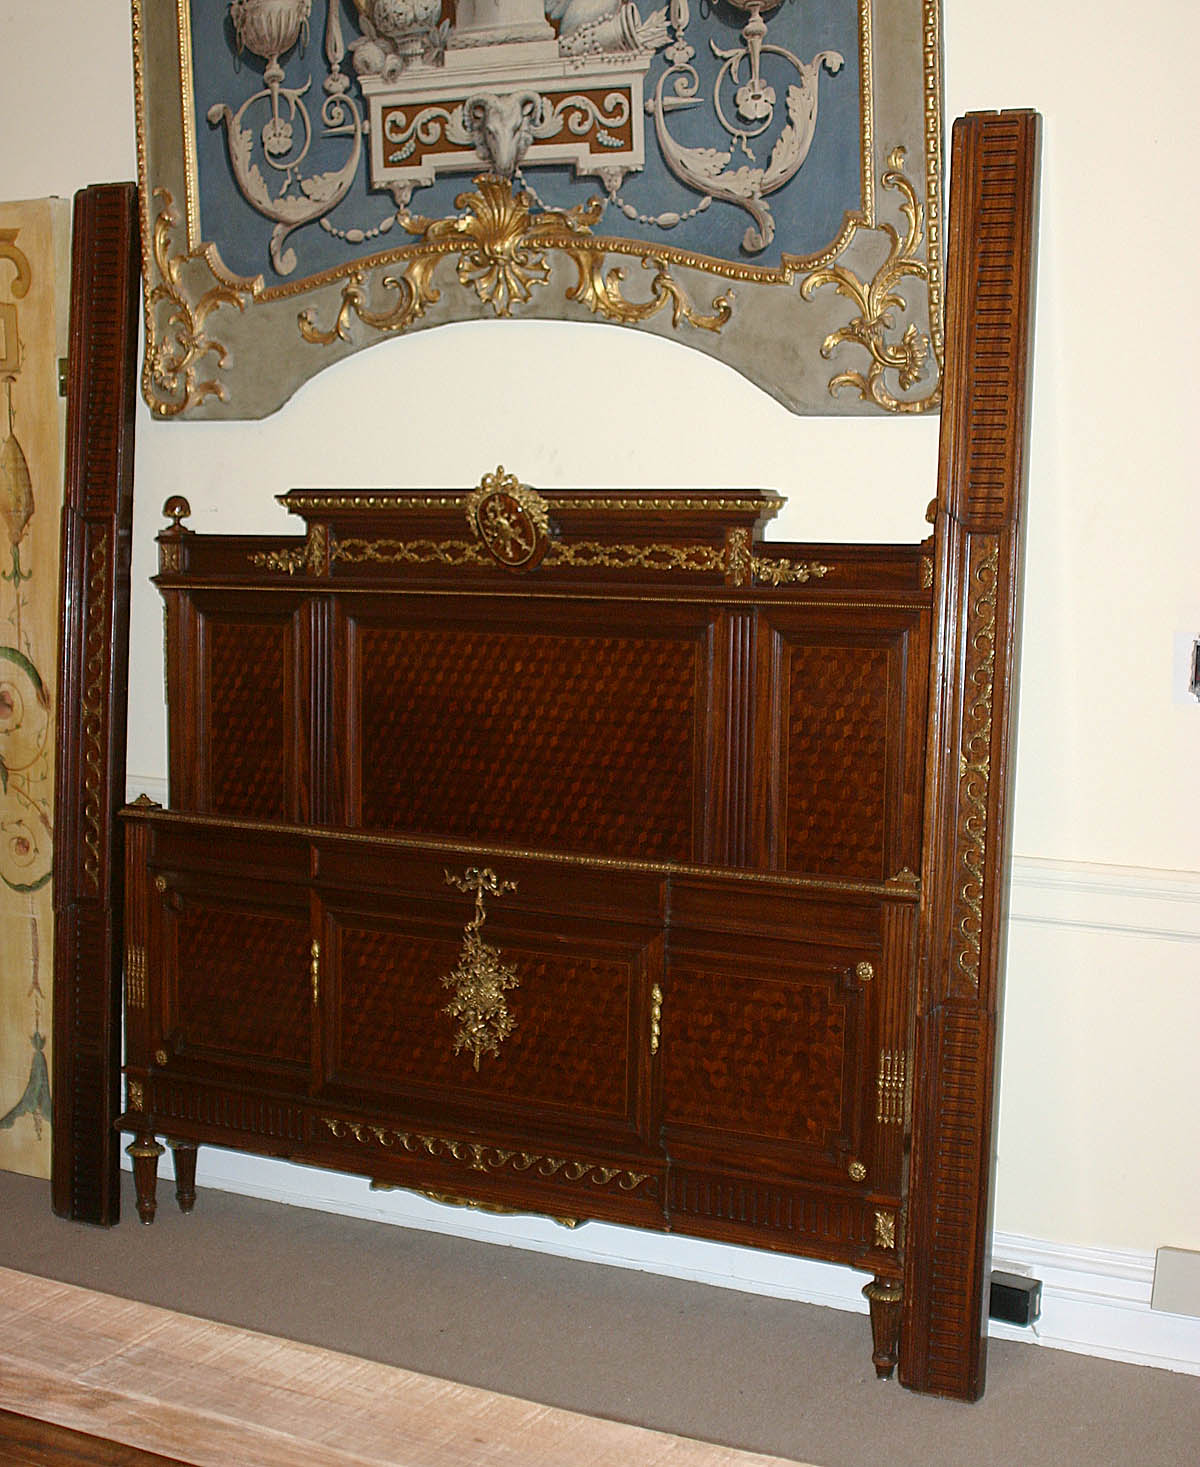 Fine, French, Louis XVI style bed